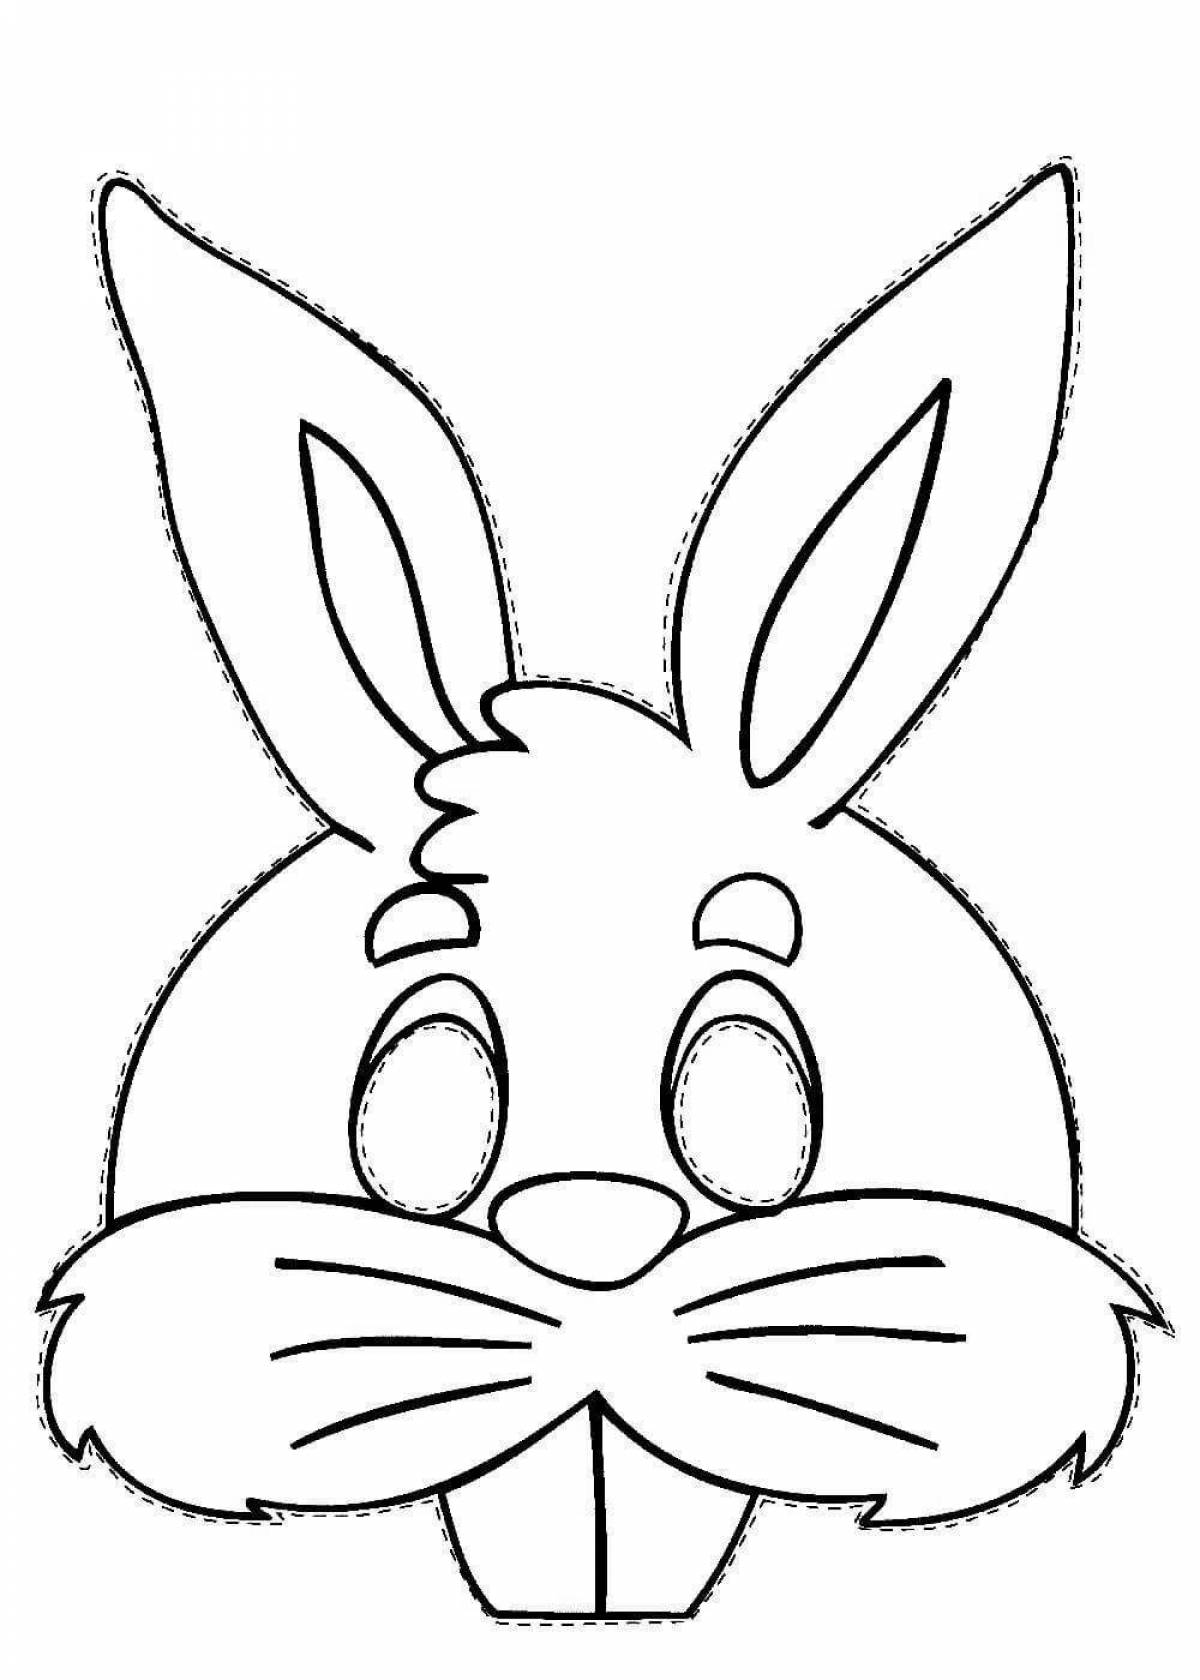 Coloring page playful muzzle of a hare